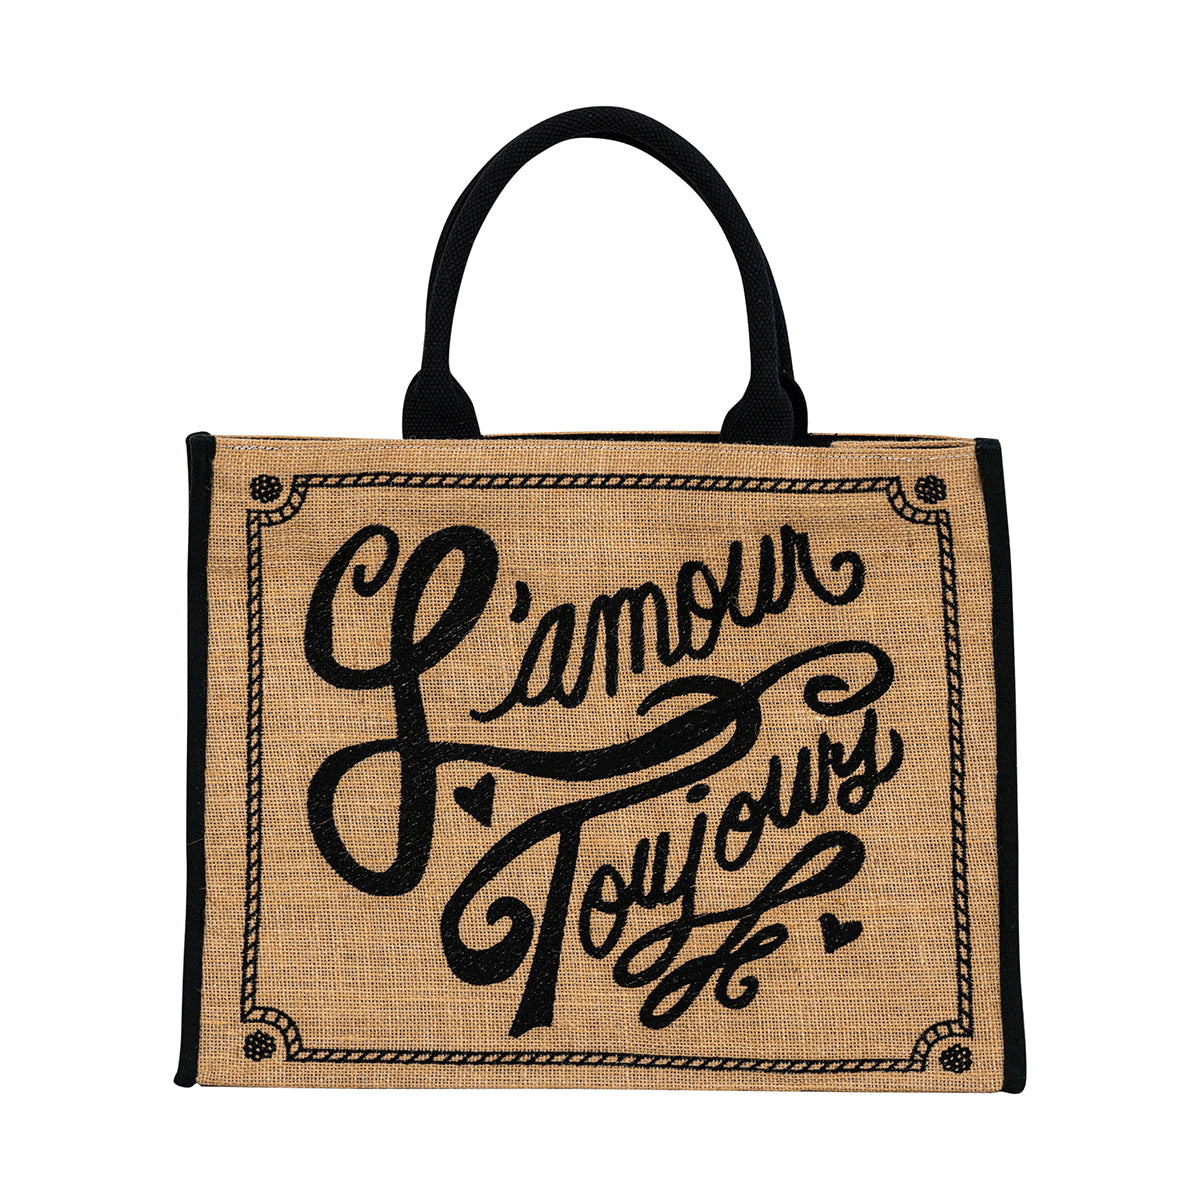 L'Amour Toujours Tote Bag
